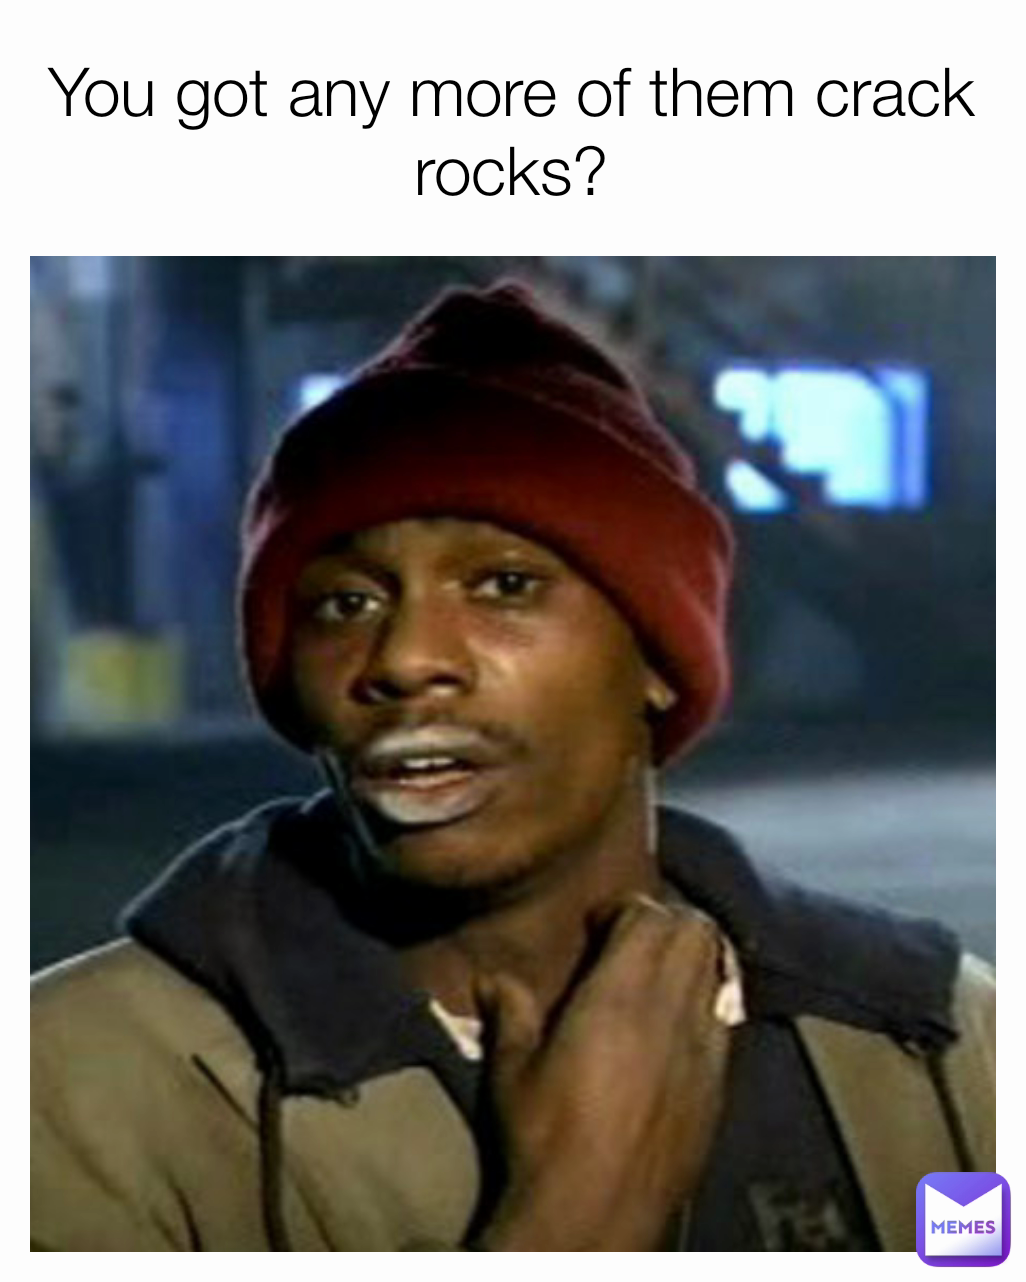 You got any more of them crack rocks?